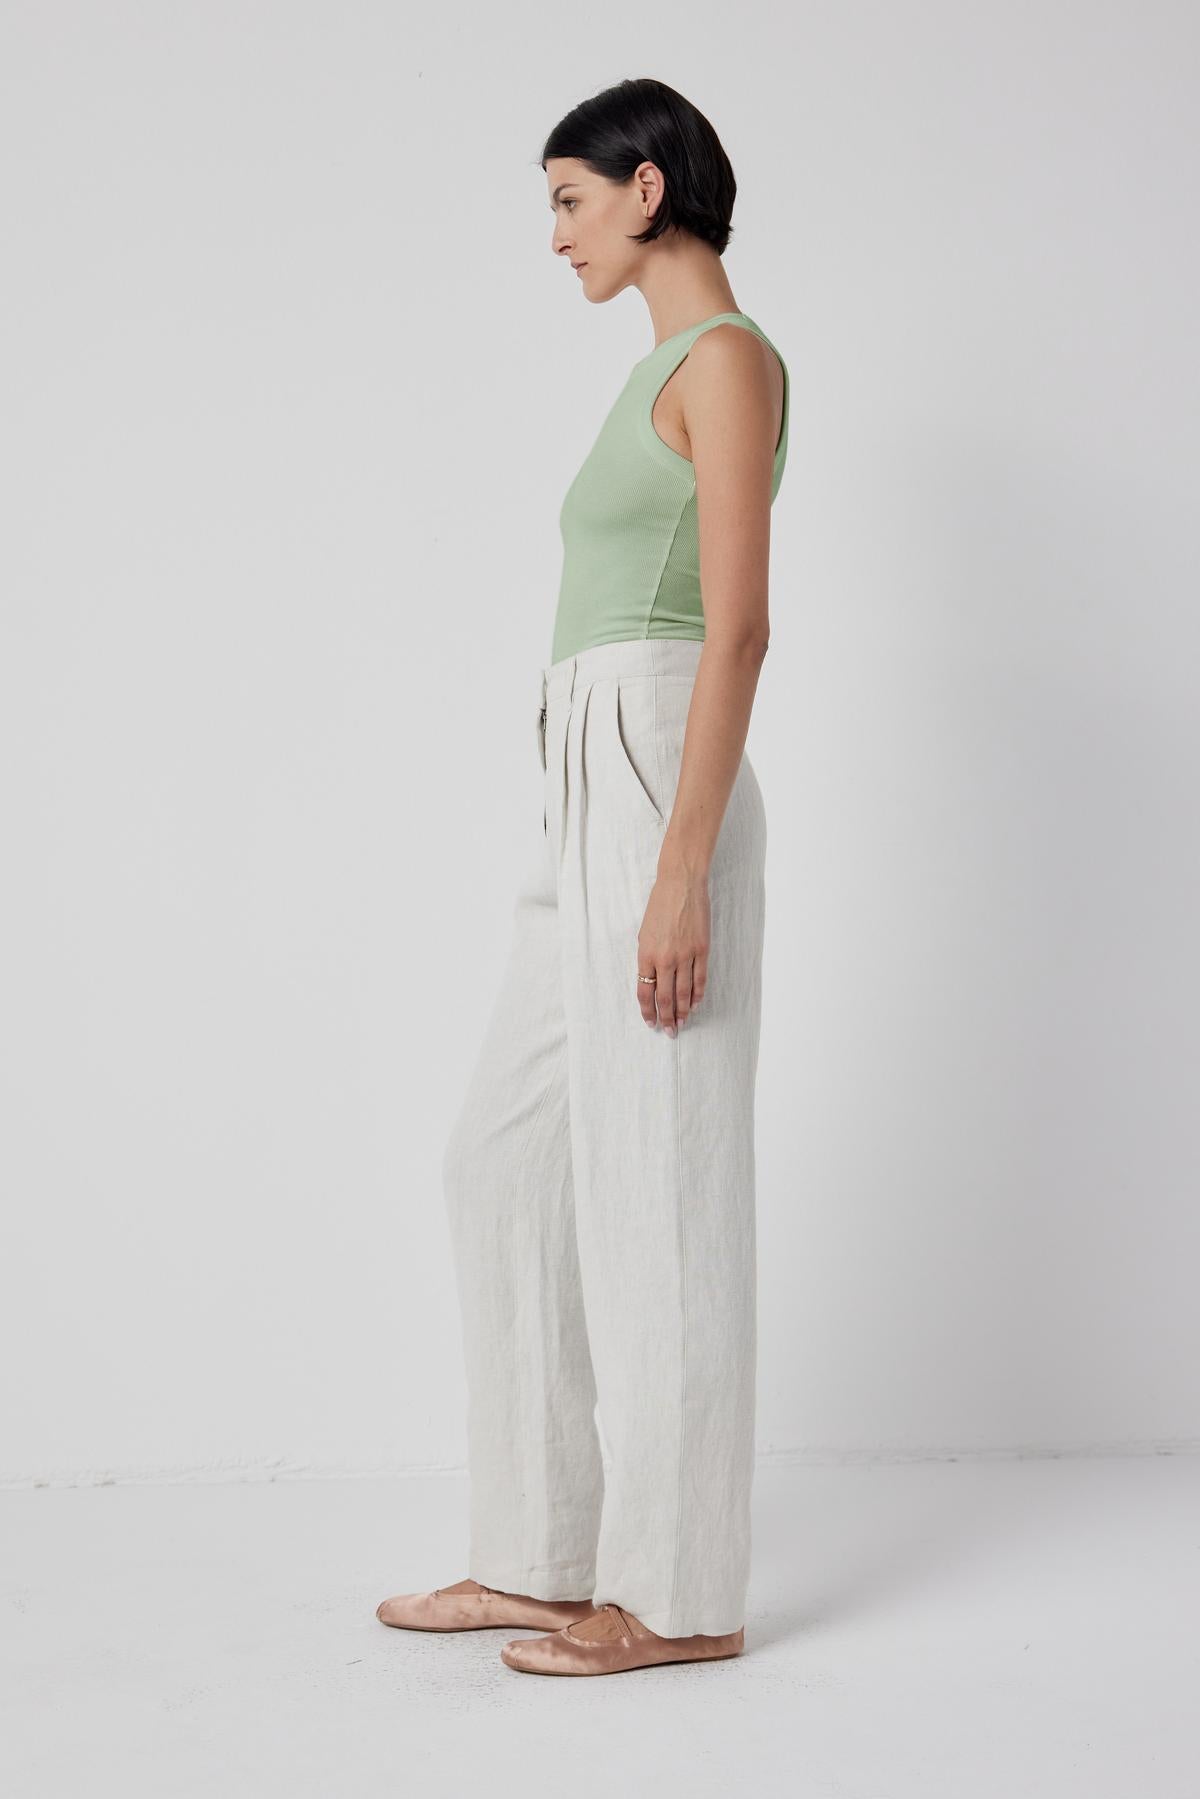 The model is wearing a Cruz Tank Top by Velvet by Jenny Graham and white linen pants that stretch comfortably over the body.-36198187958465